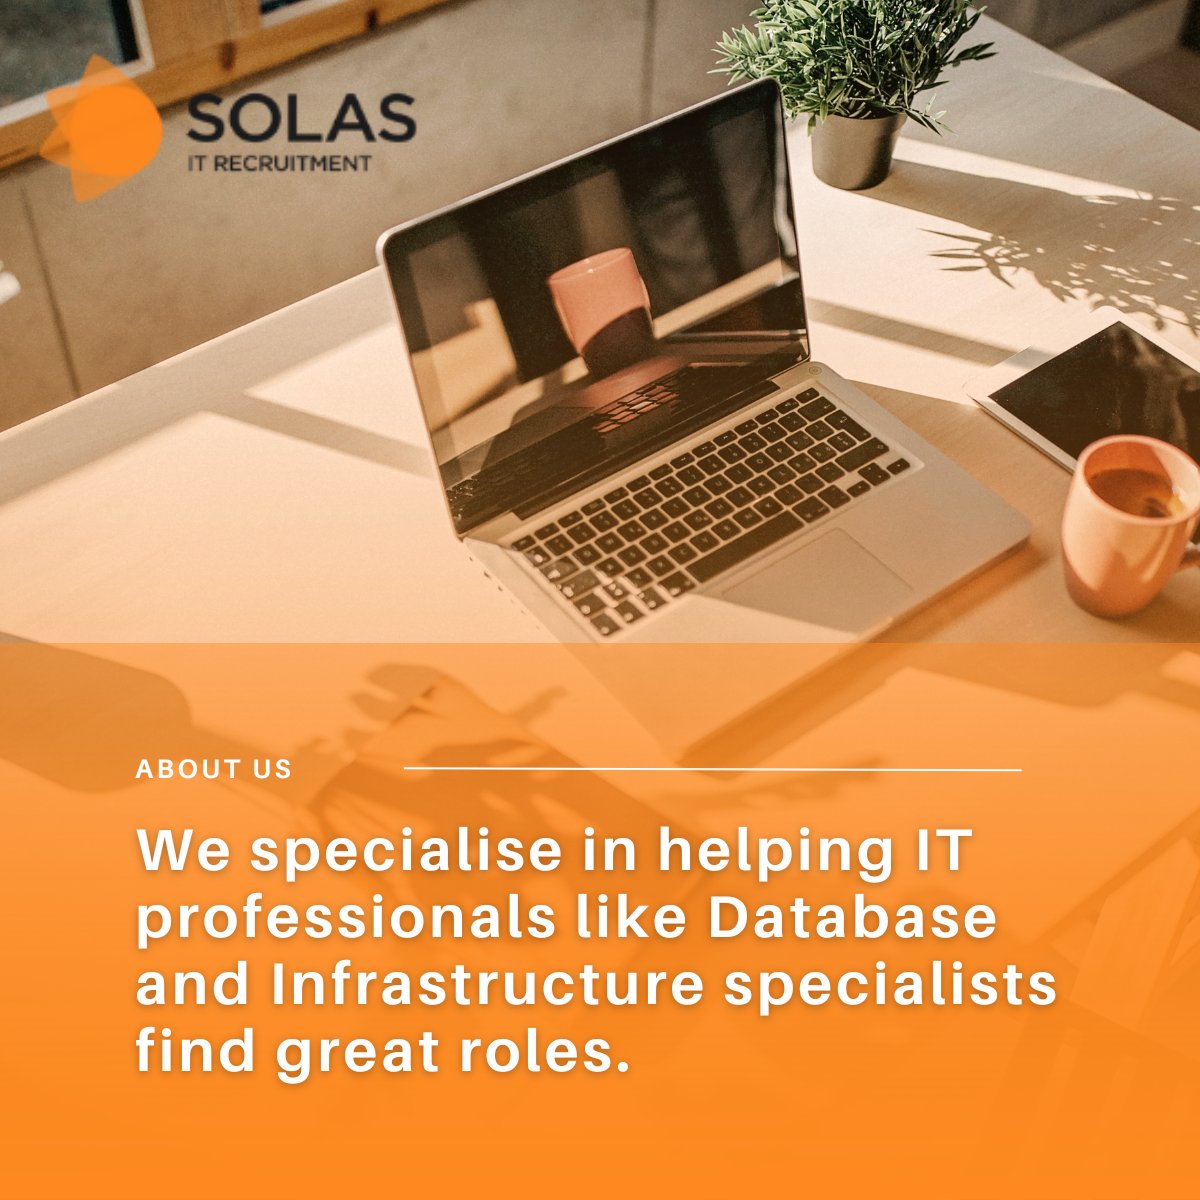 At Solas IT, we specialise in helping IT professionals like Database and Infrastructure specialists find great roles.

If you have a great role and are looking for the best IT professional to fill it, get in touch today on 01 244 9520.

#IT #Tech #Recruitment #IrishBiz